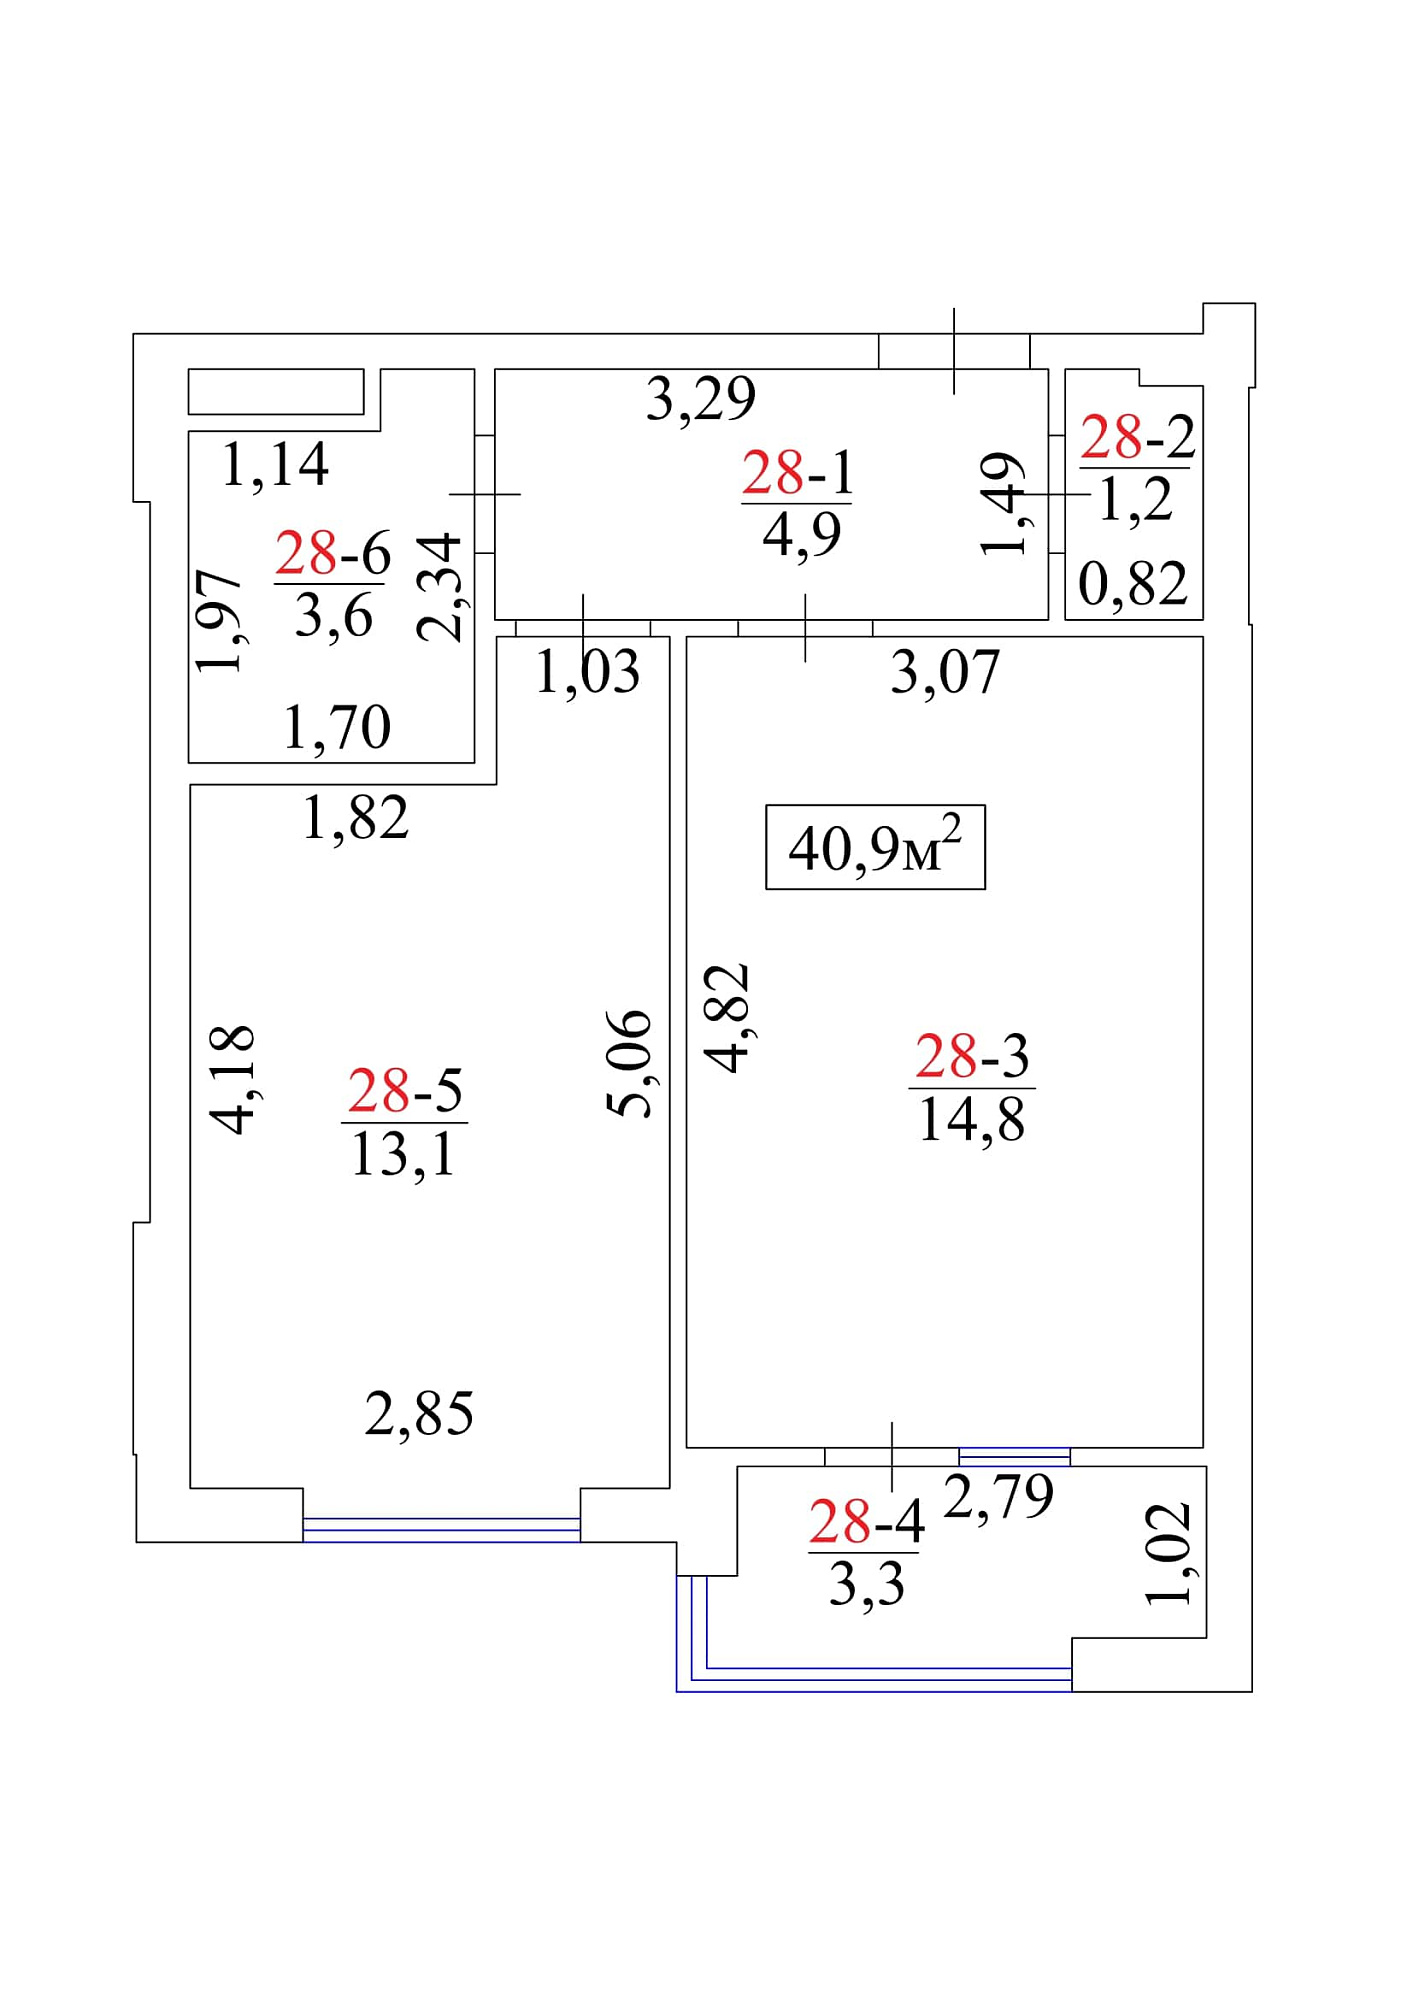 Planning 1-rm flats area 40.9m2, AB-01-04/00028.